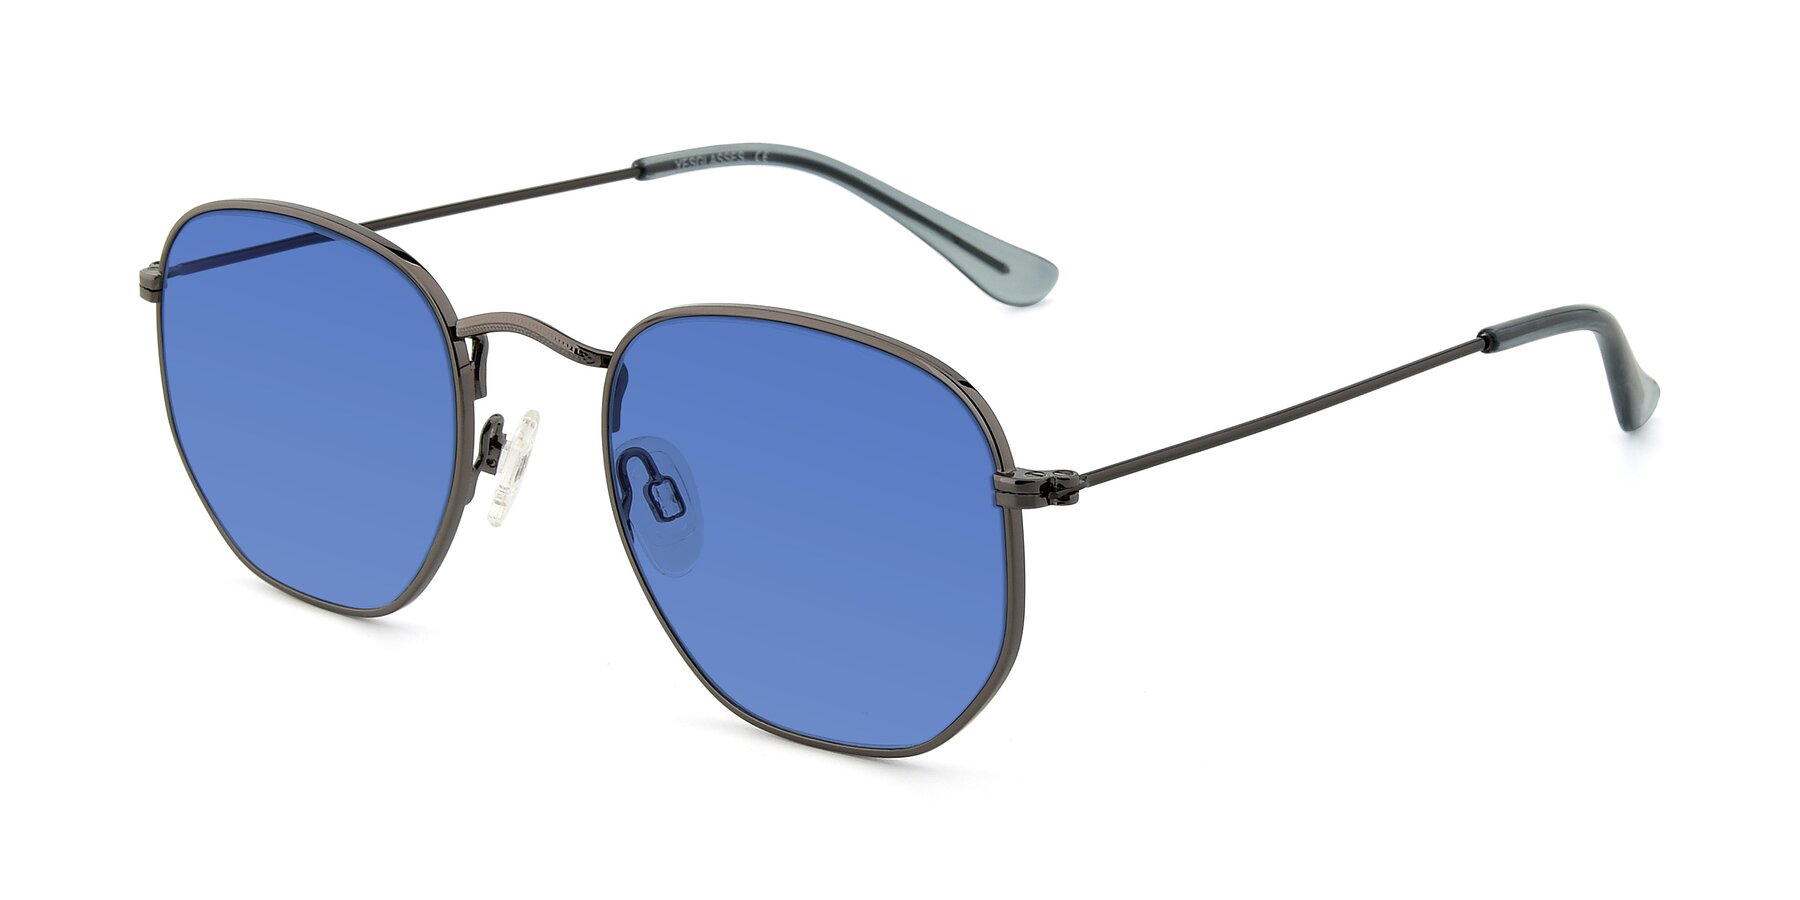 Angle of SSR1944 in Grey with Blue Tinted Lenses